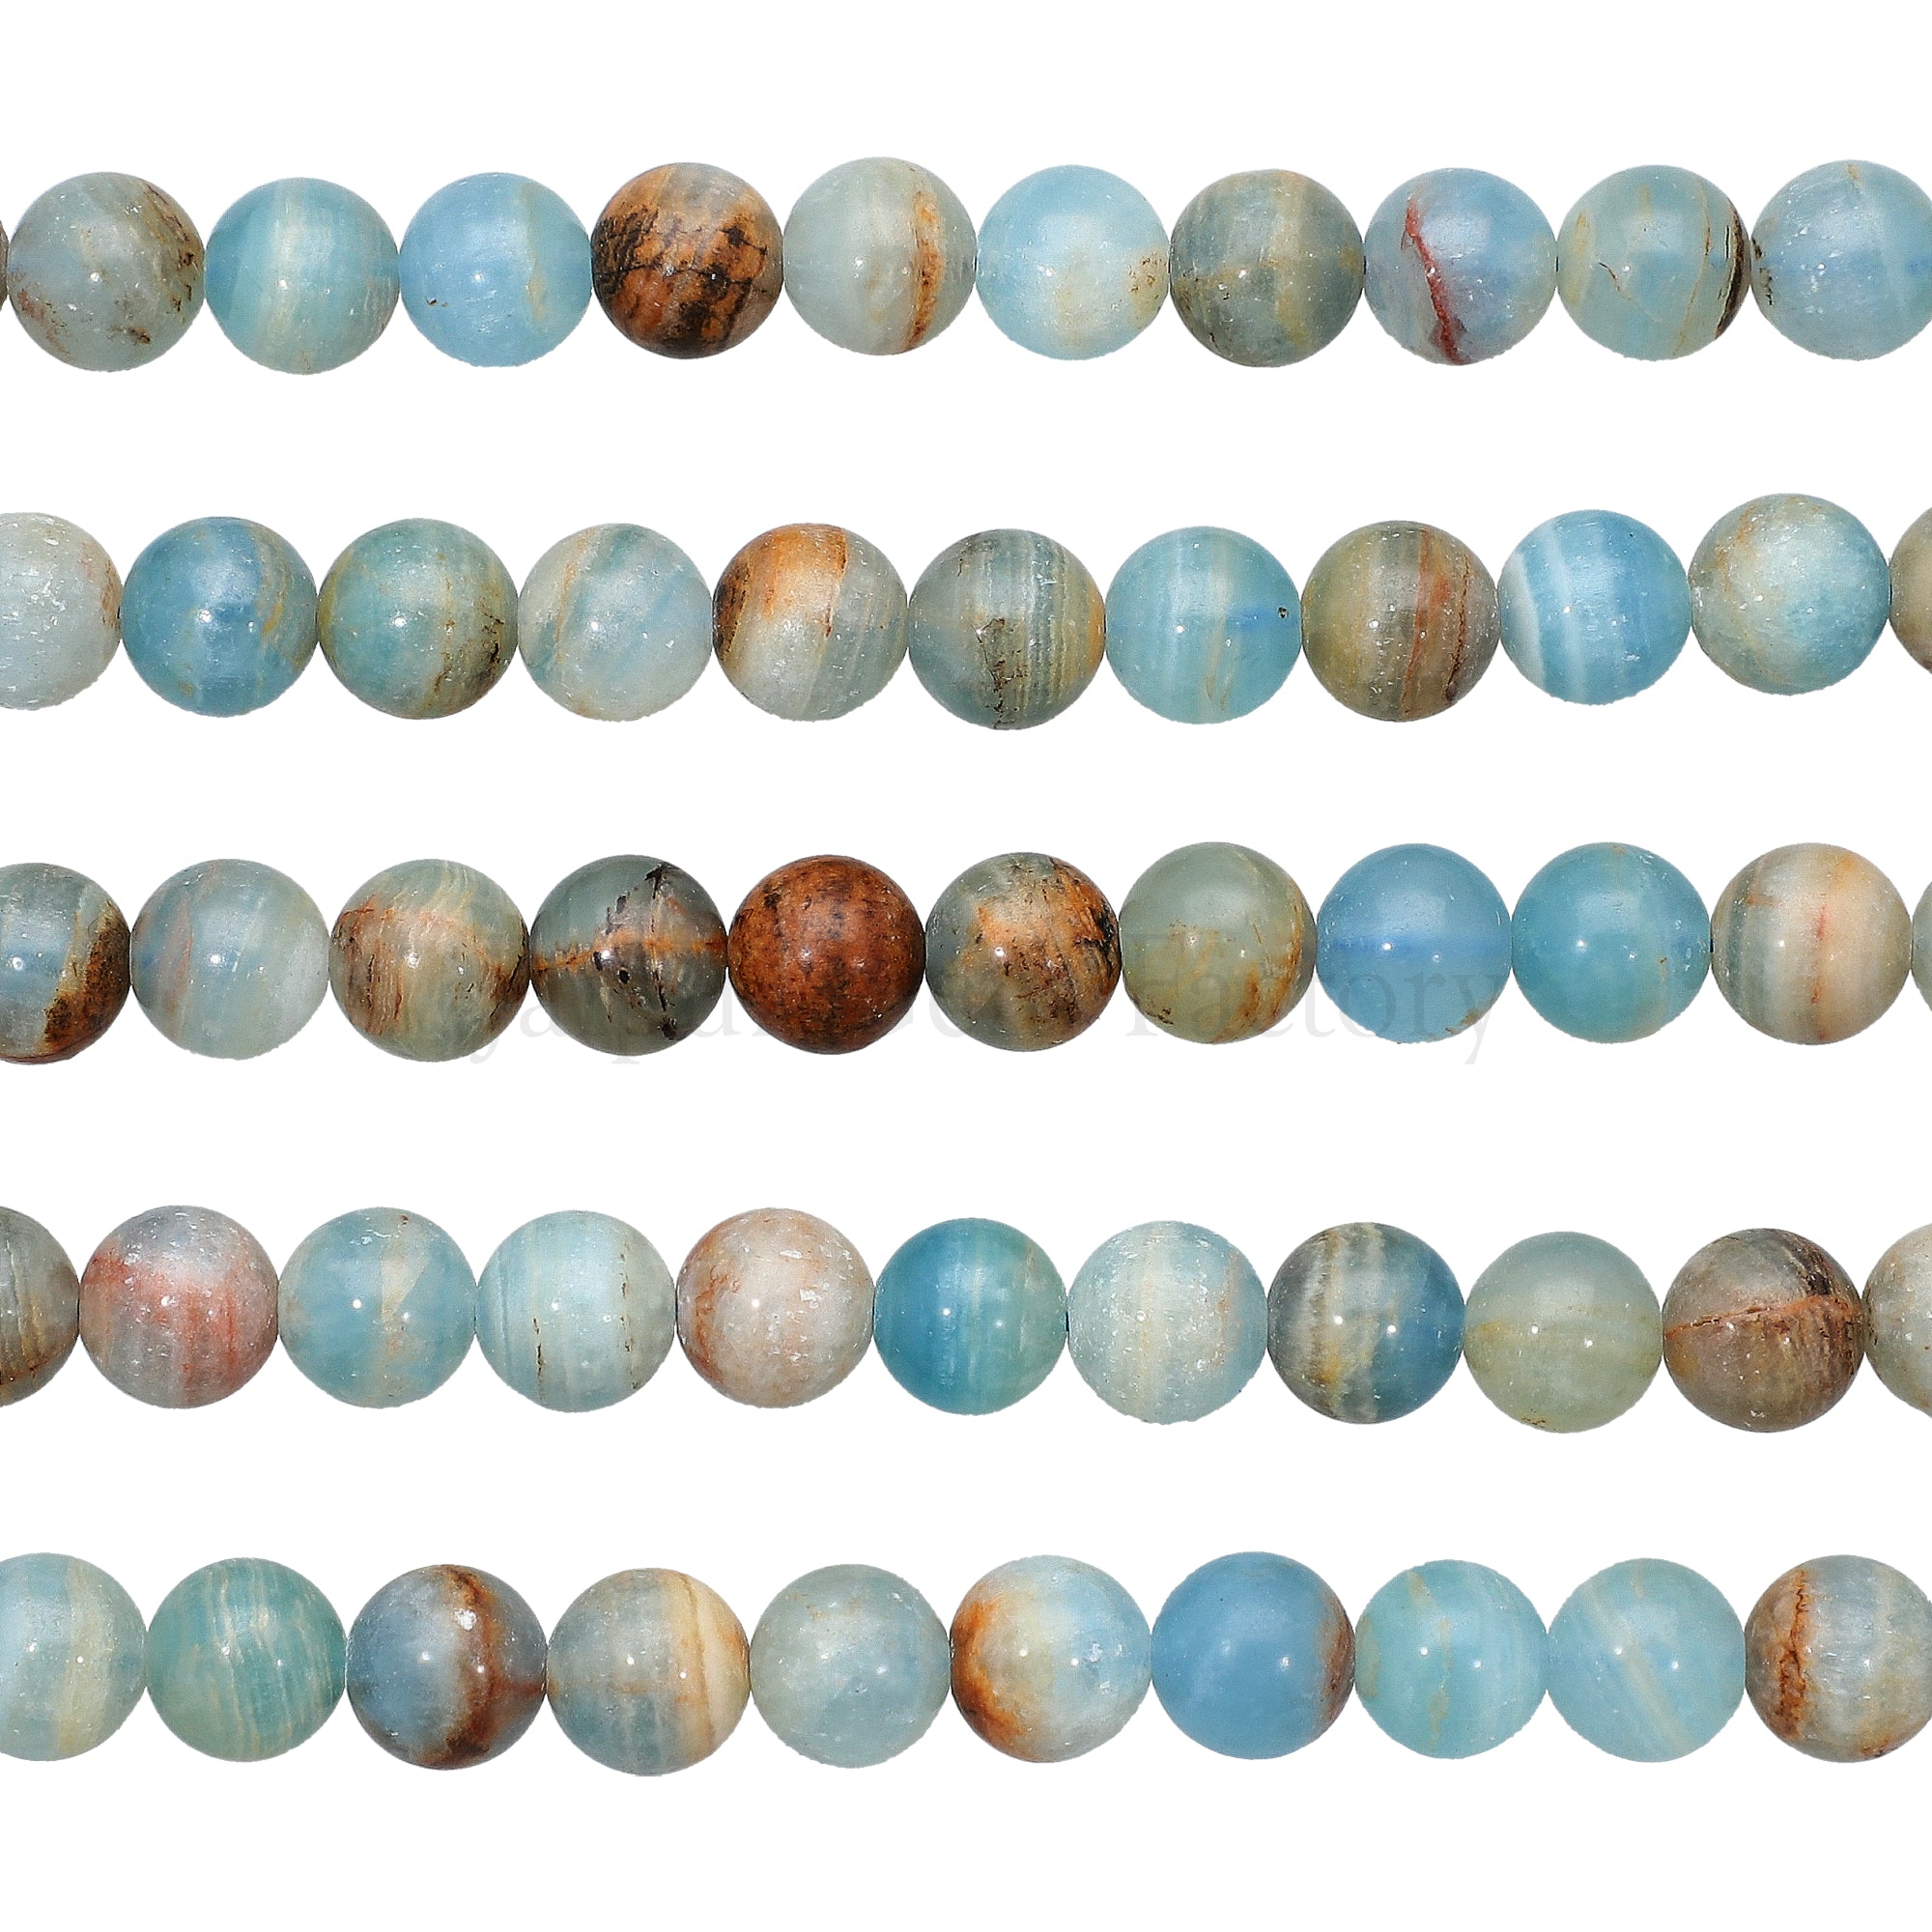 10 MM Blue Calcite Smooth Round Beads 14 Inches Strand